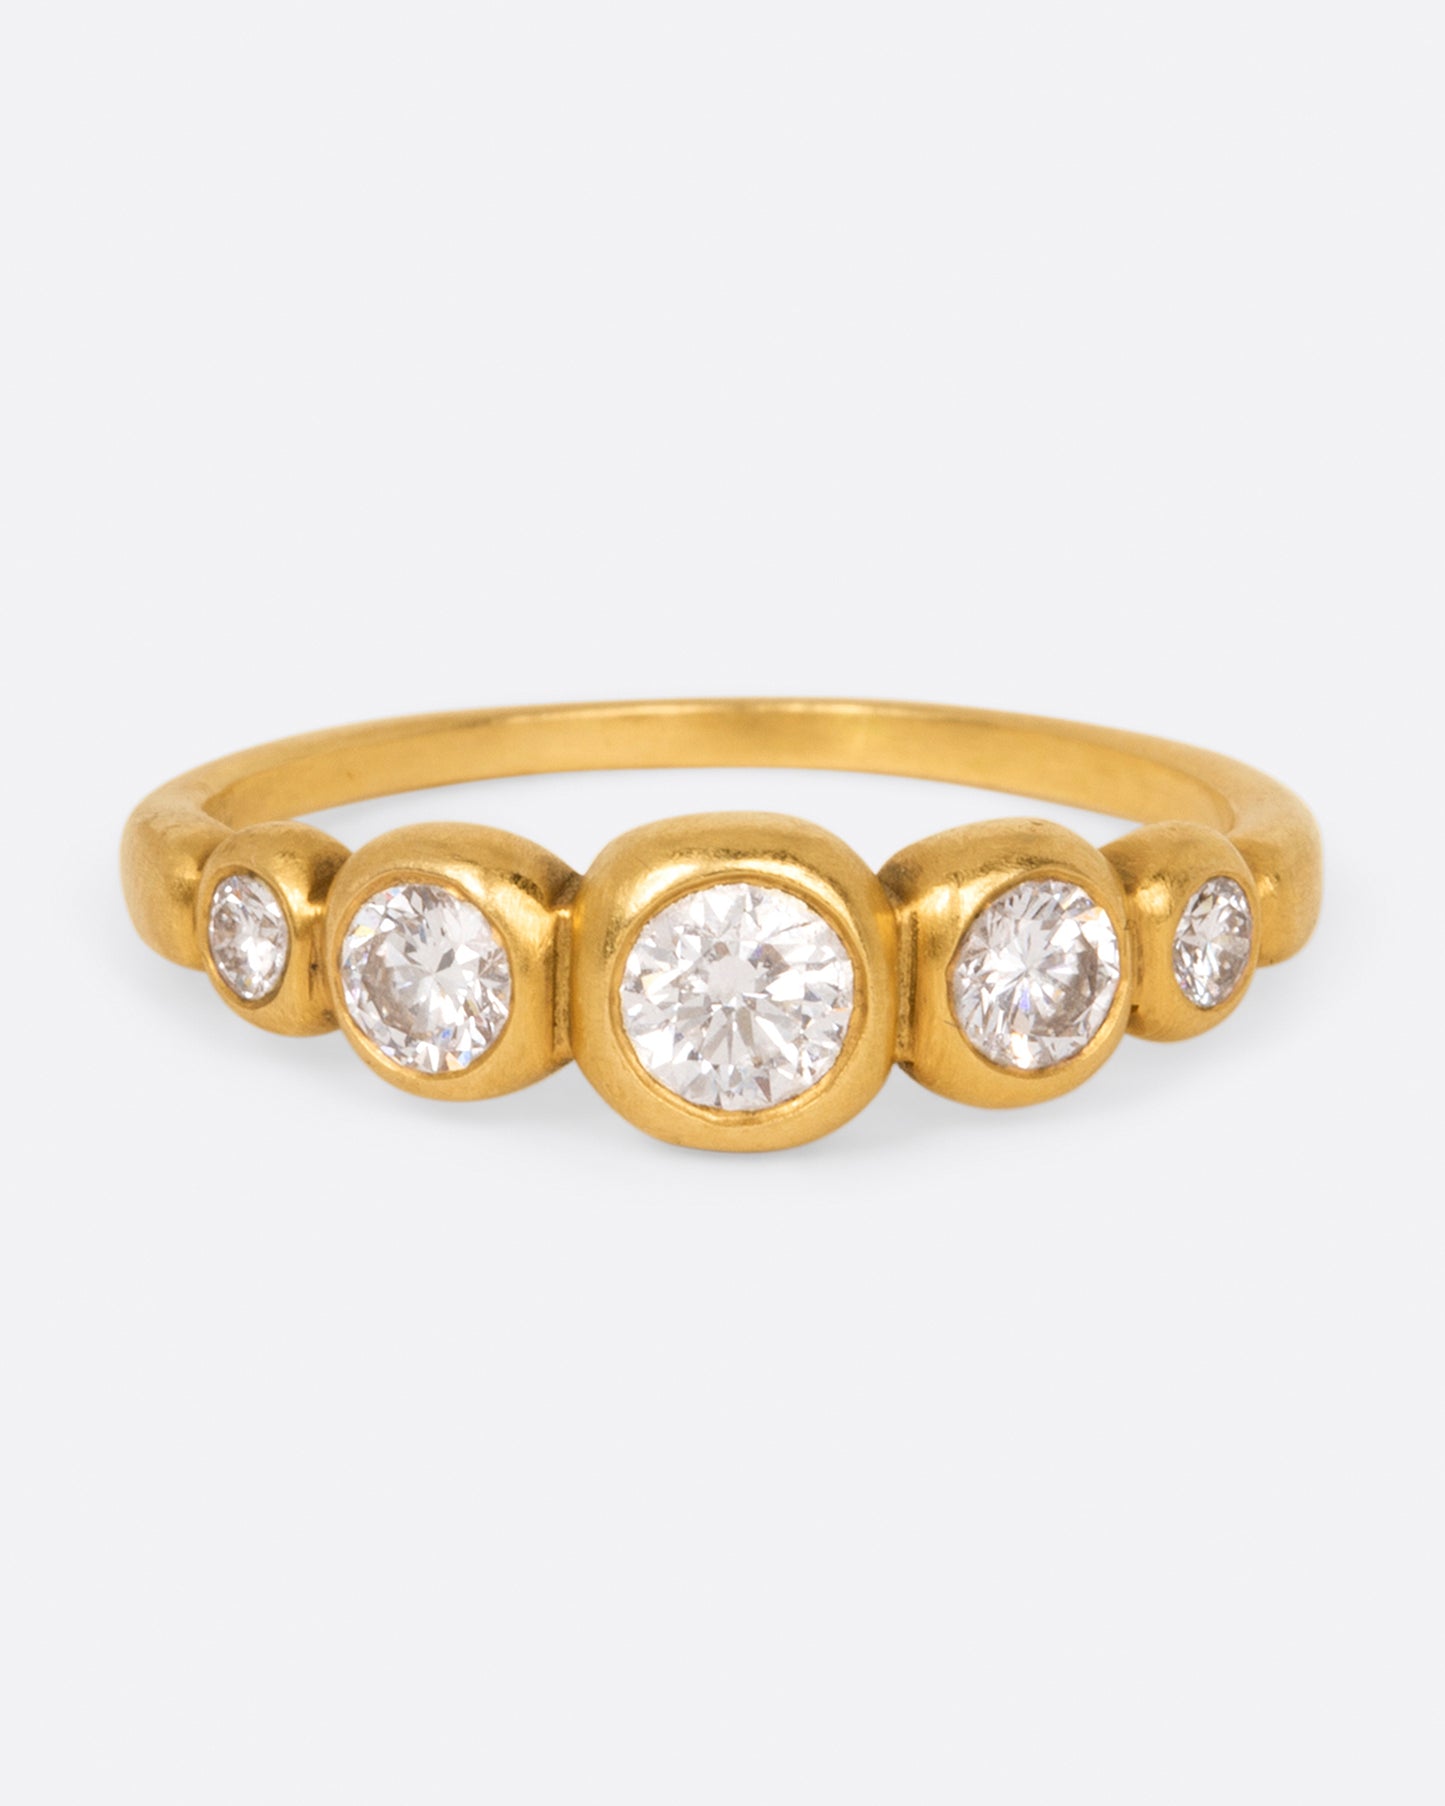 A brushed gold ring with five round white diamonds in graduated sizes, shown from the front.